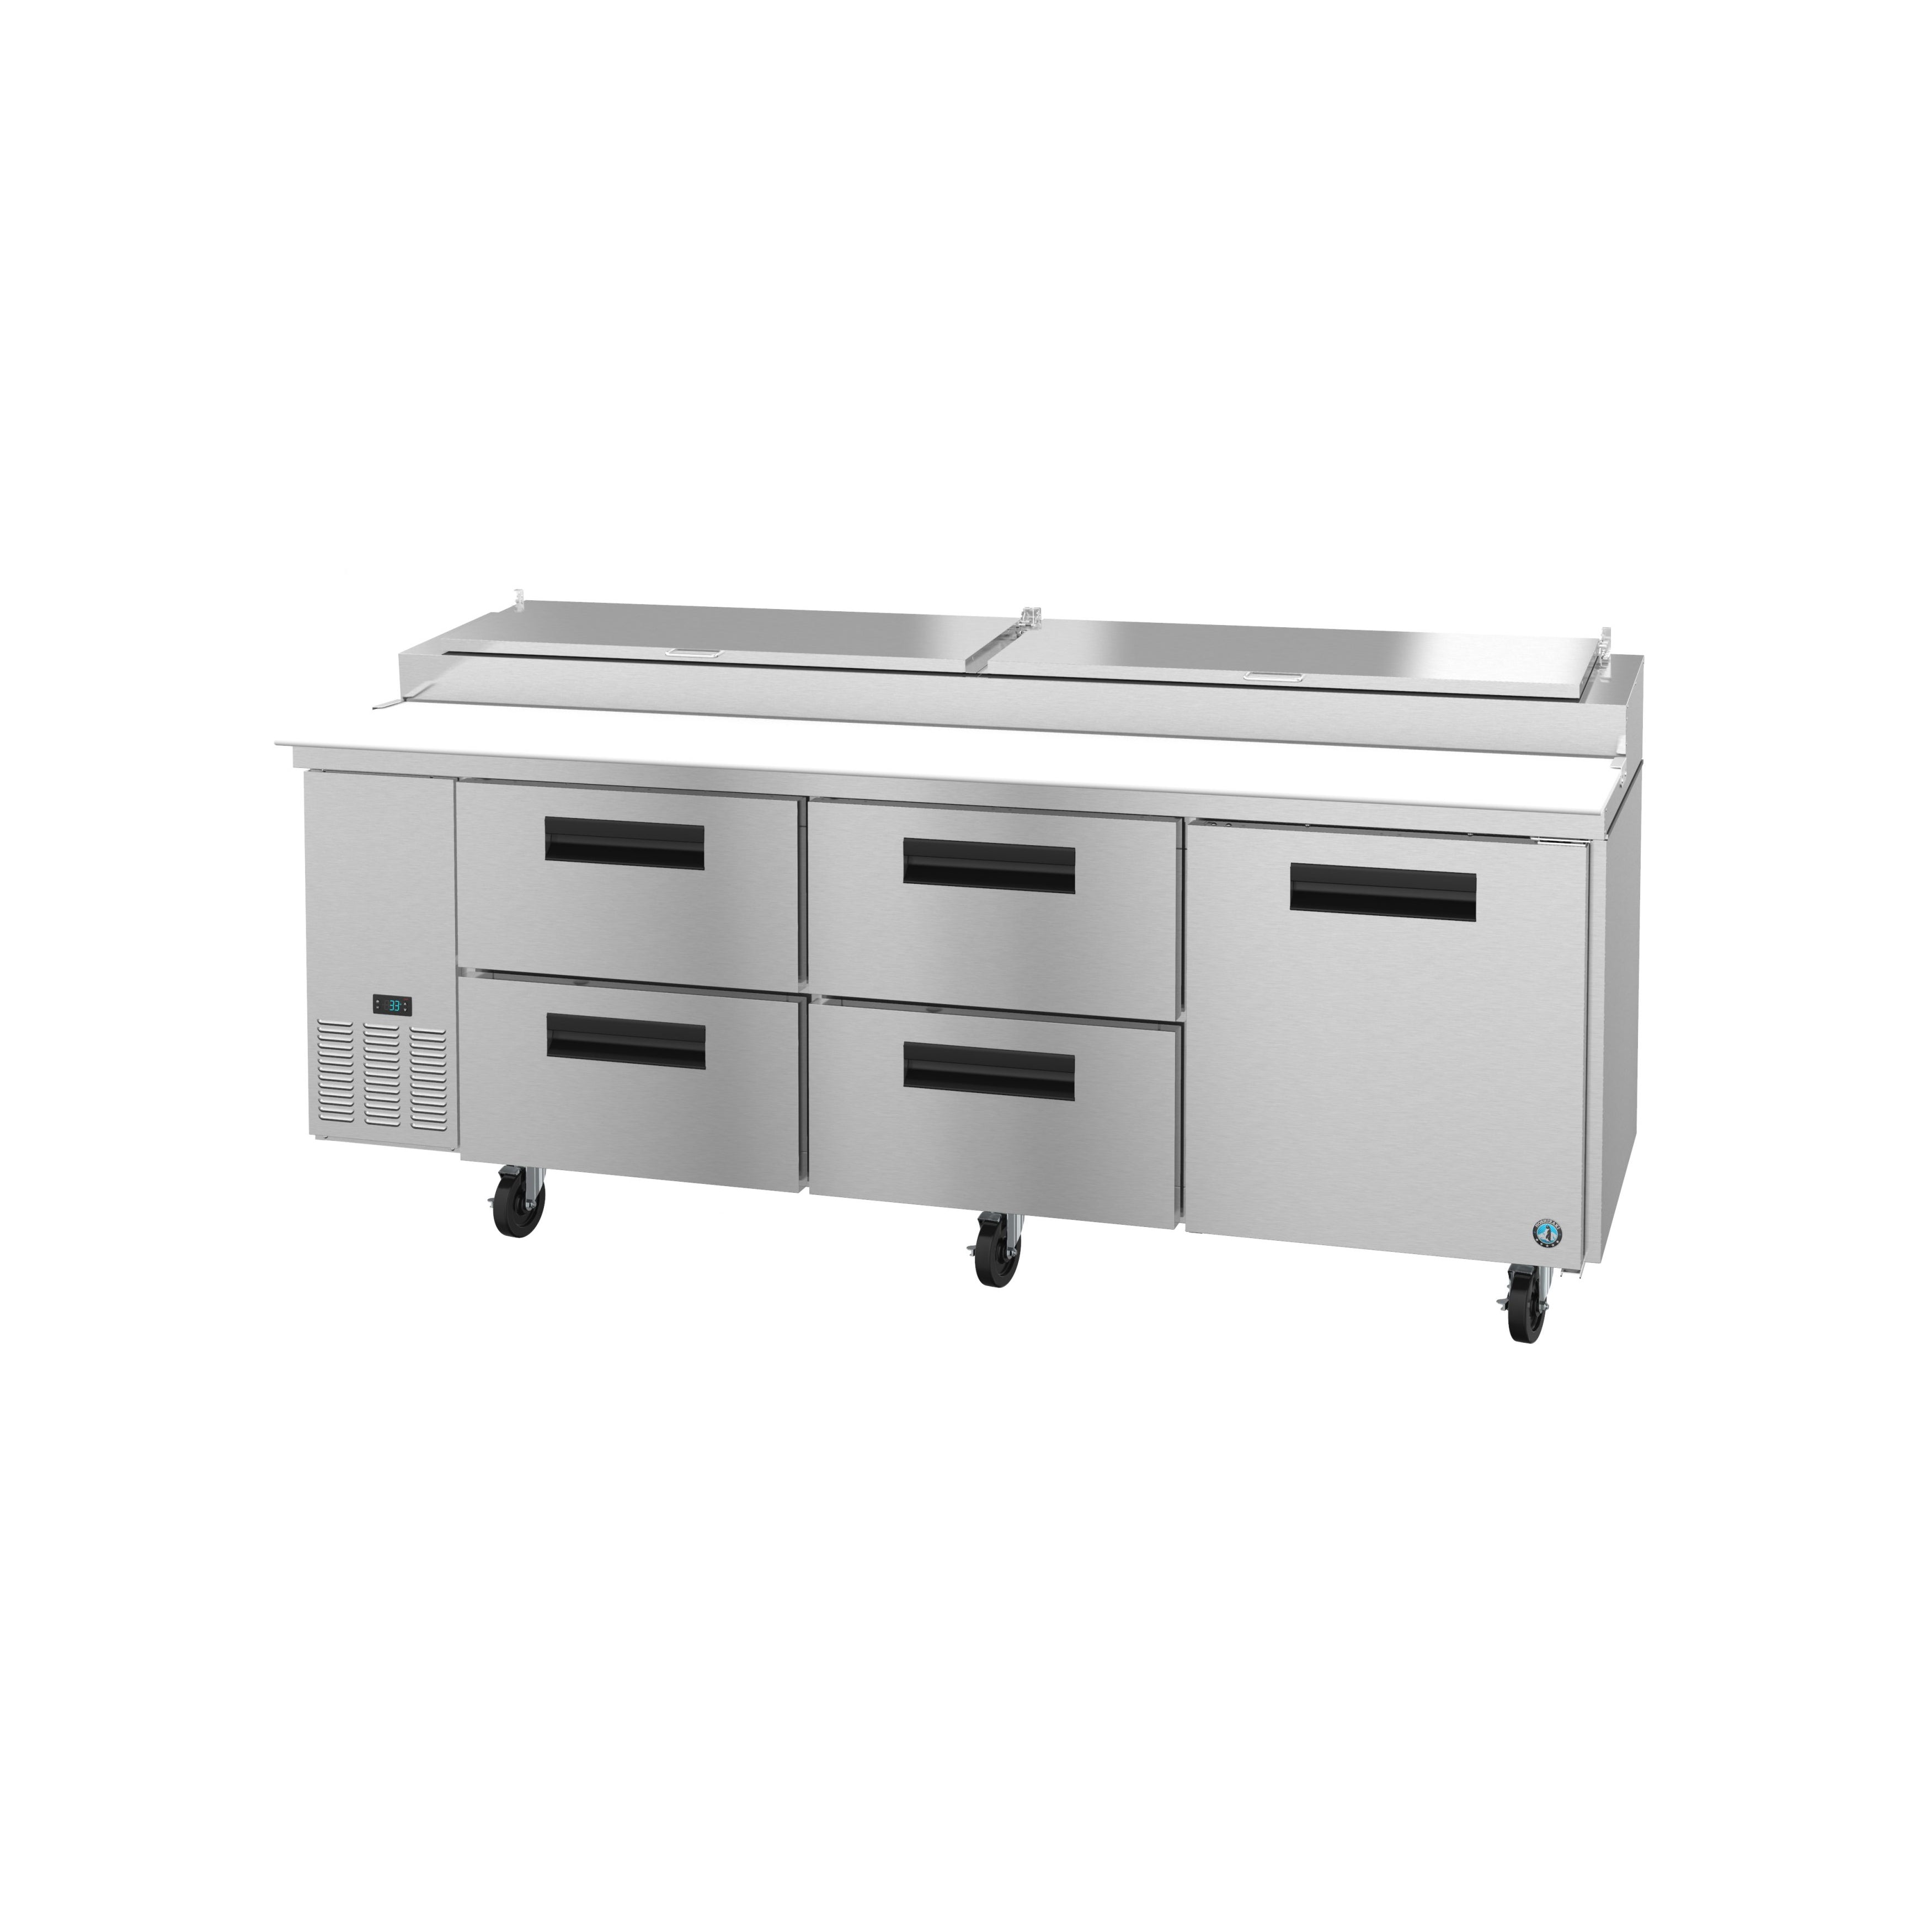 Hoshizaki - PR93A-D4, Commercial 93" Three Section Pizza Prep Table, Drawer Door Combo 30cu.ft.